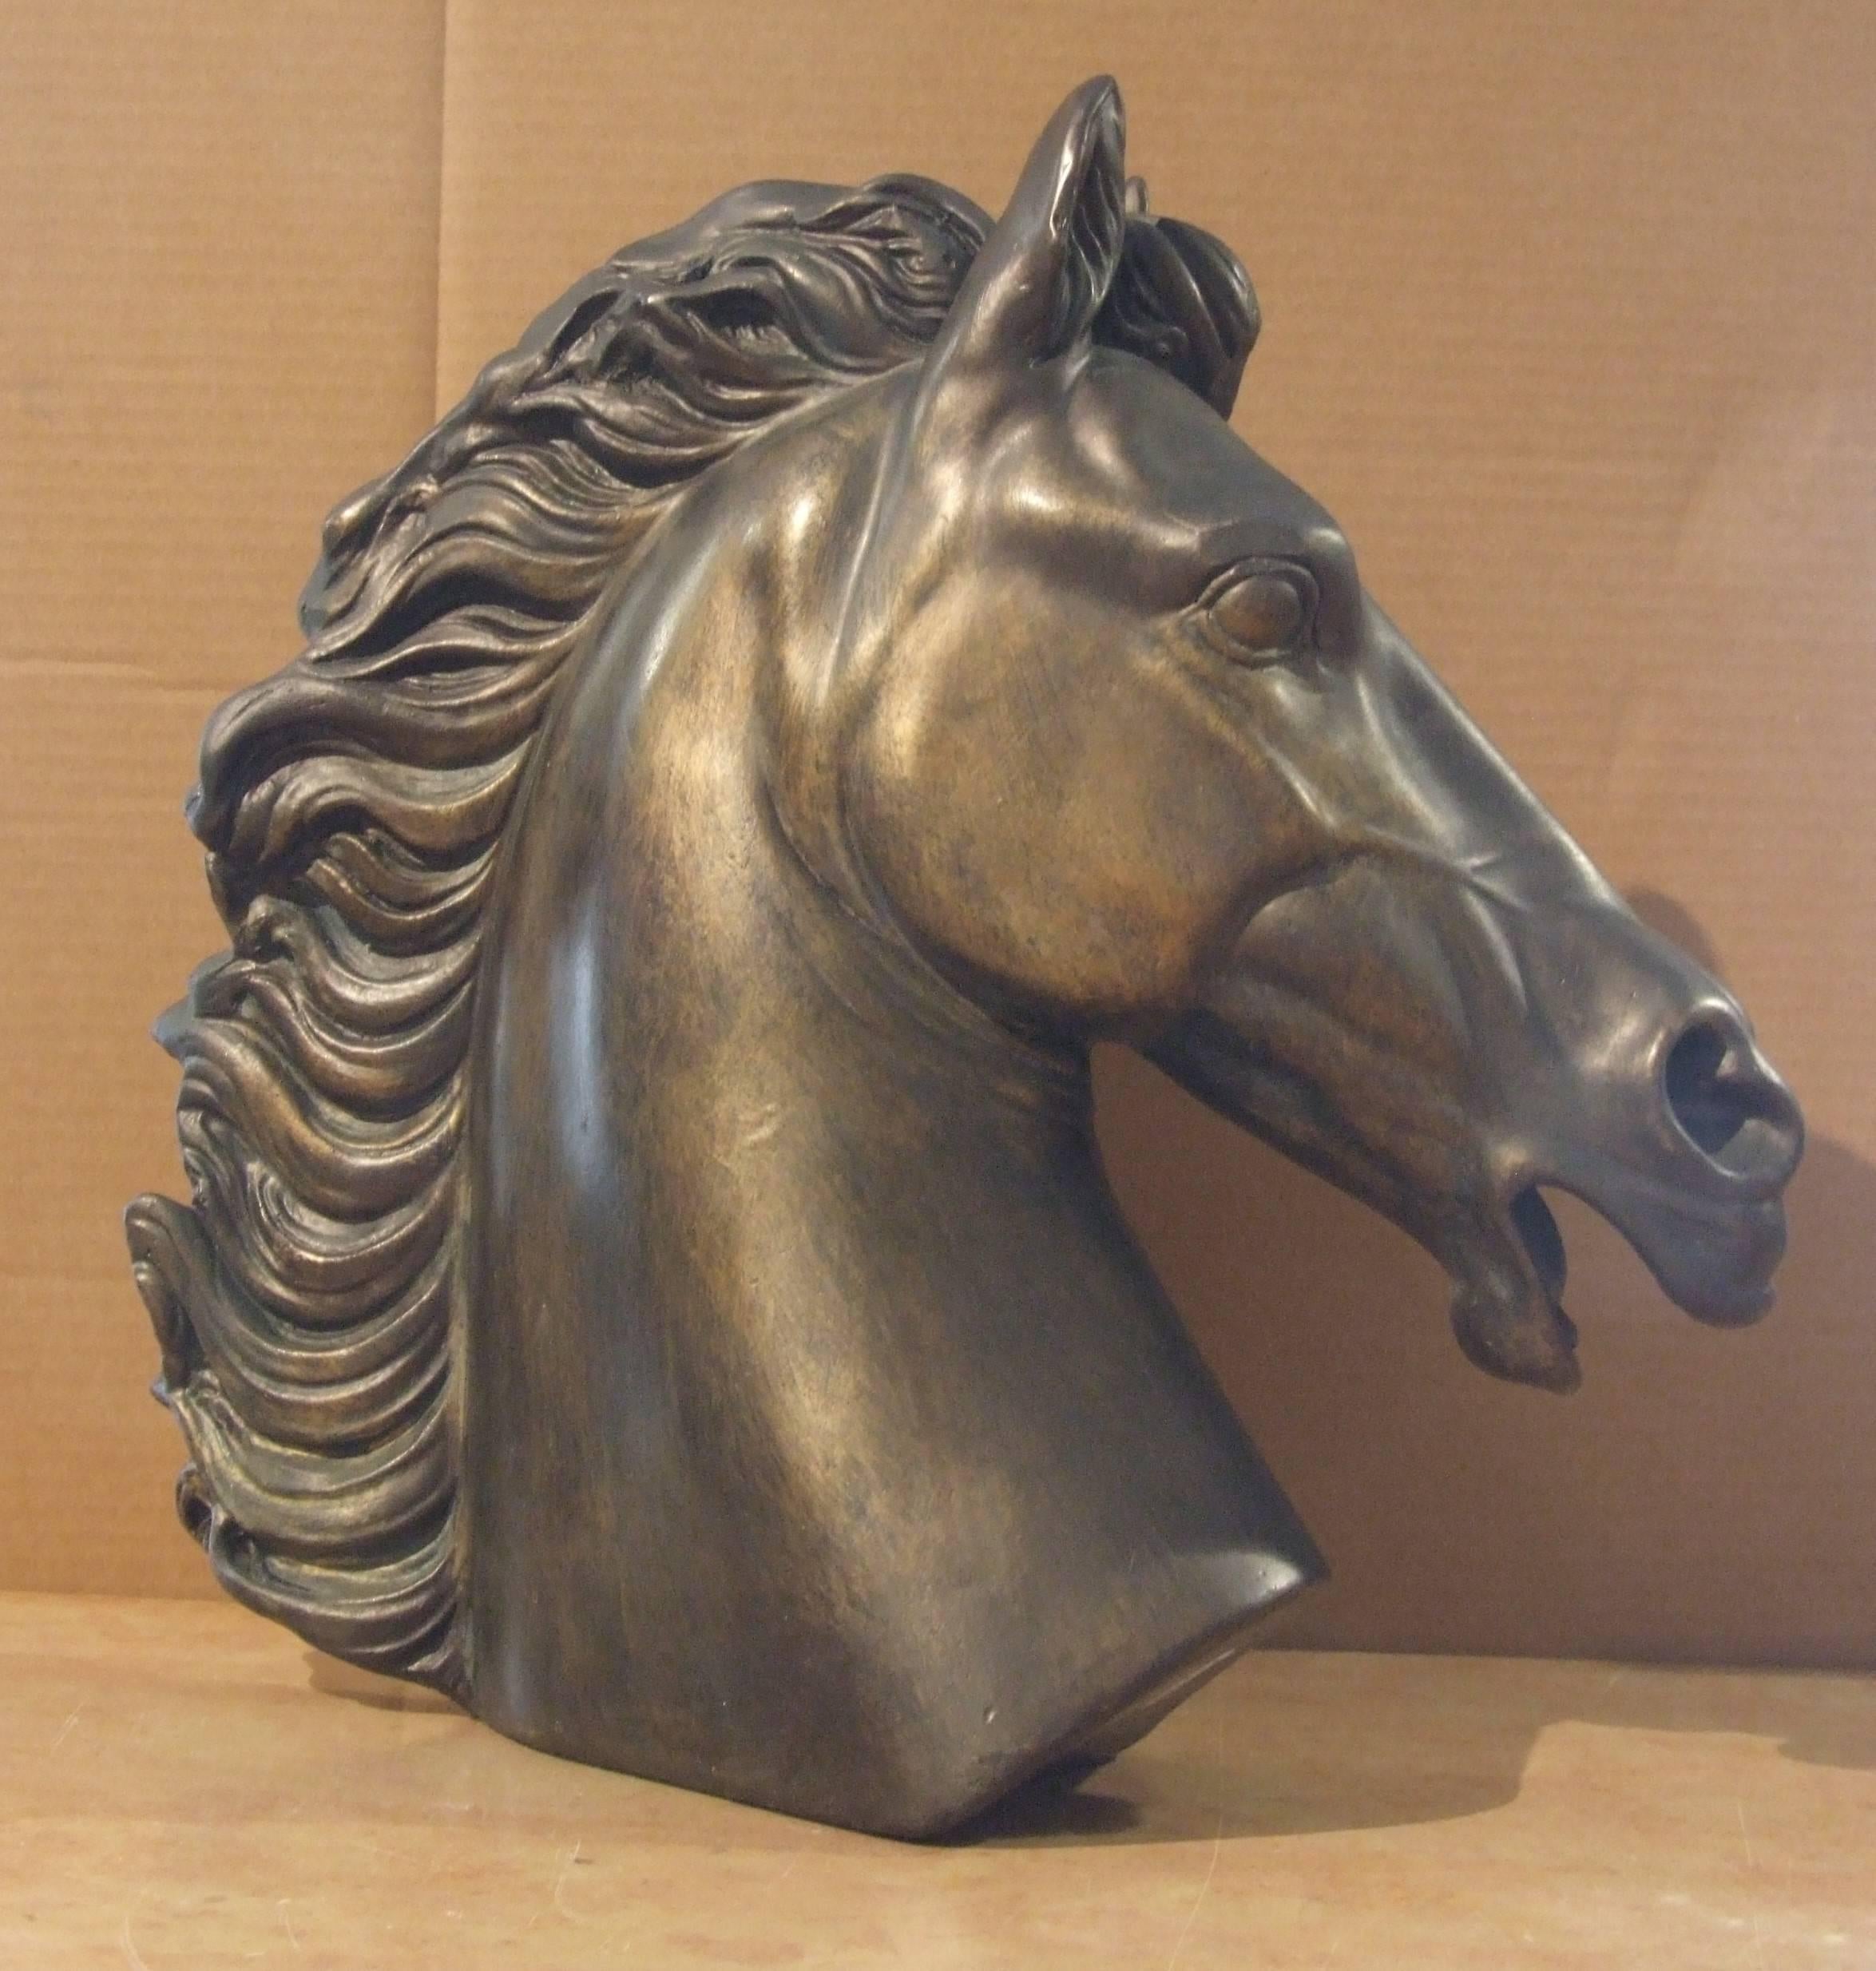 Unknown Figurative Sculpture - Head of horse - painted clay, 40x40x12 cm.